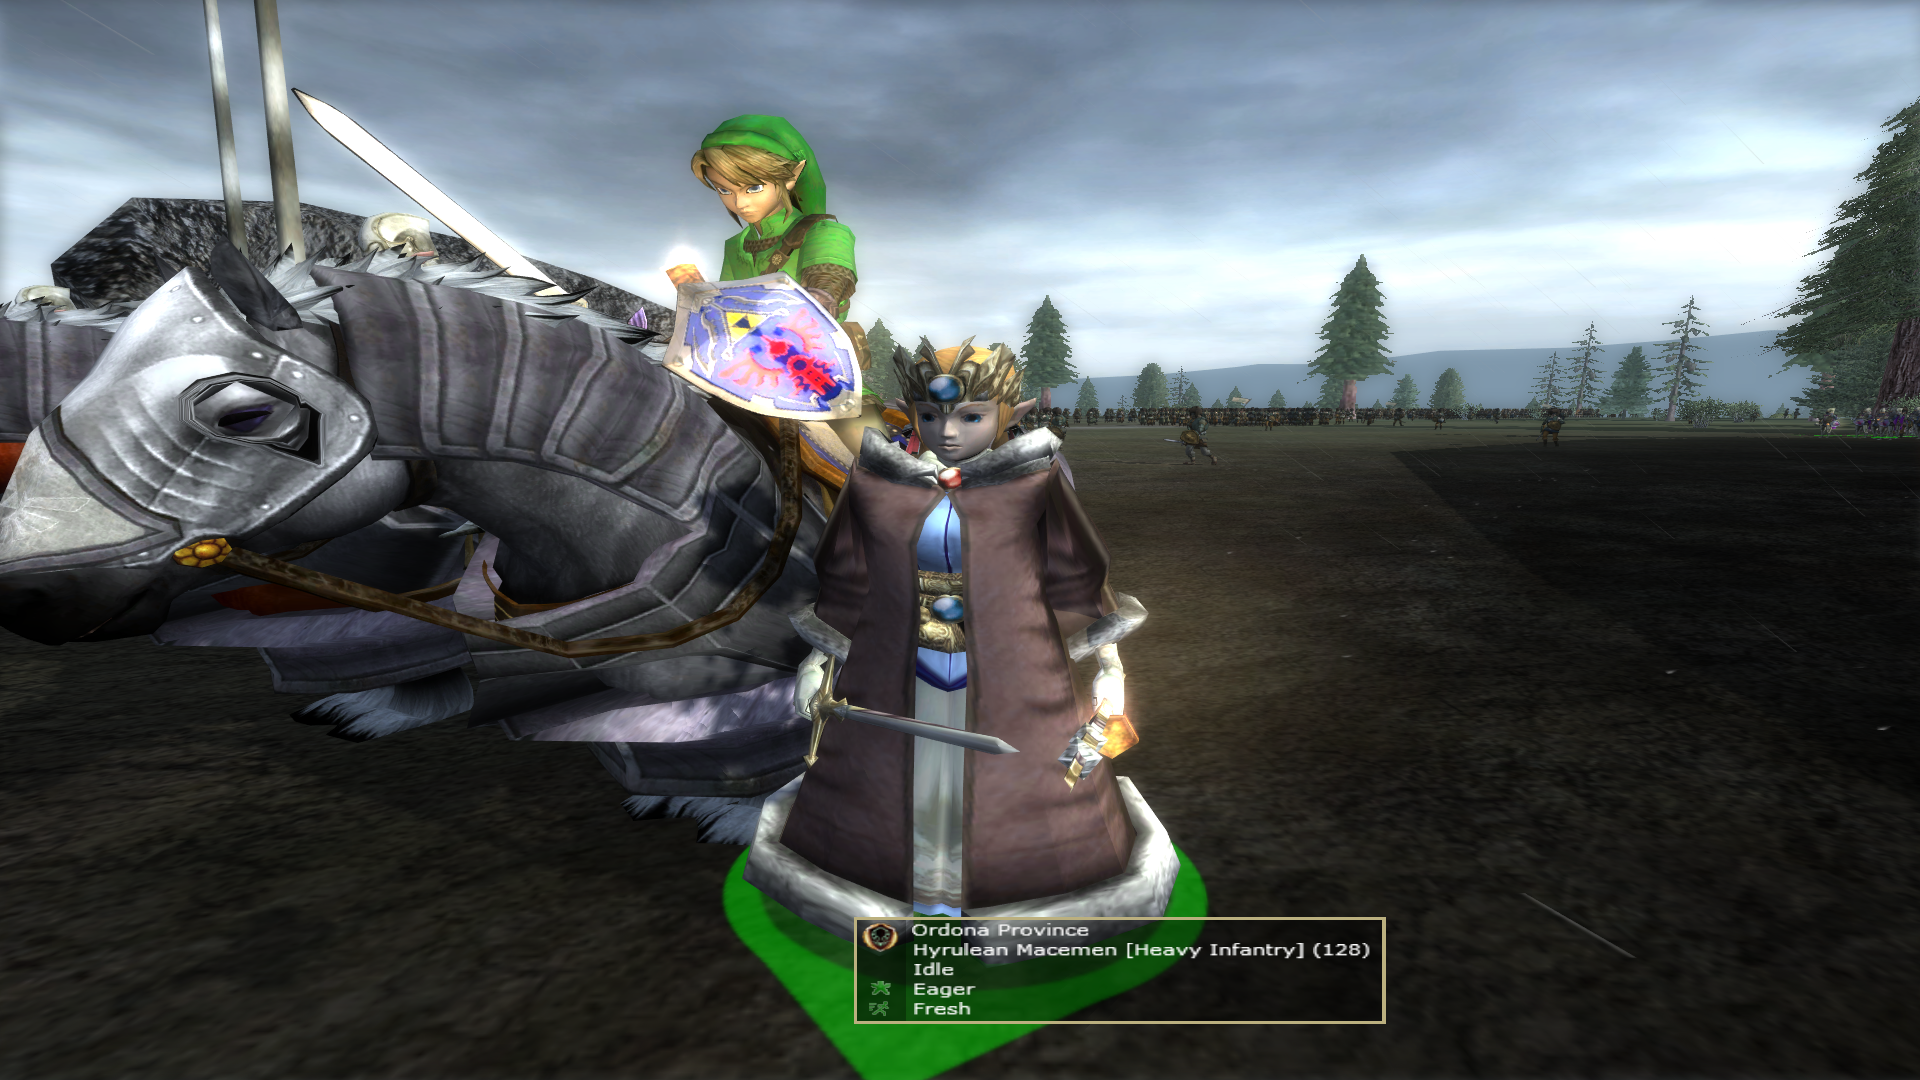 Hero of Time, Link and Princess Zelda 1 (using a coat) in battle for Ordona!